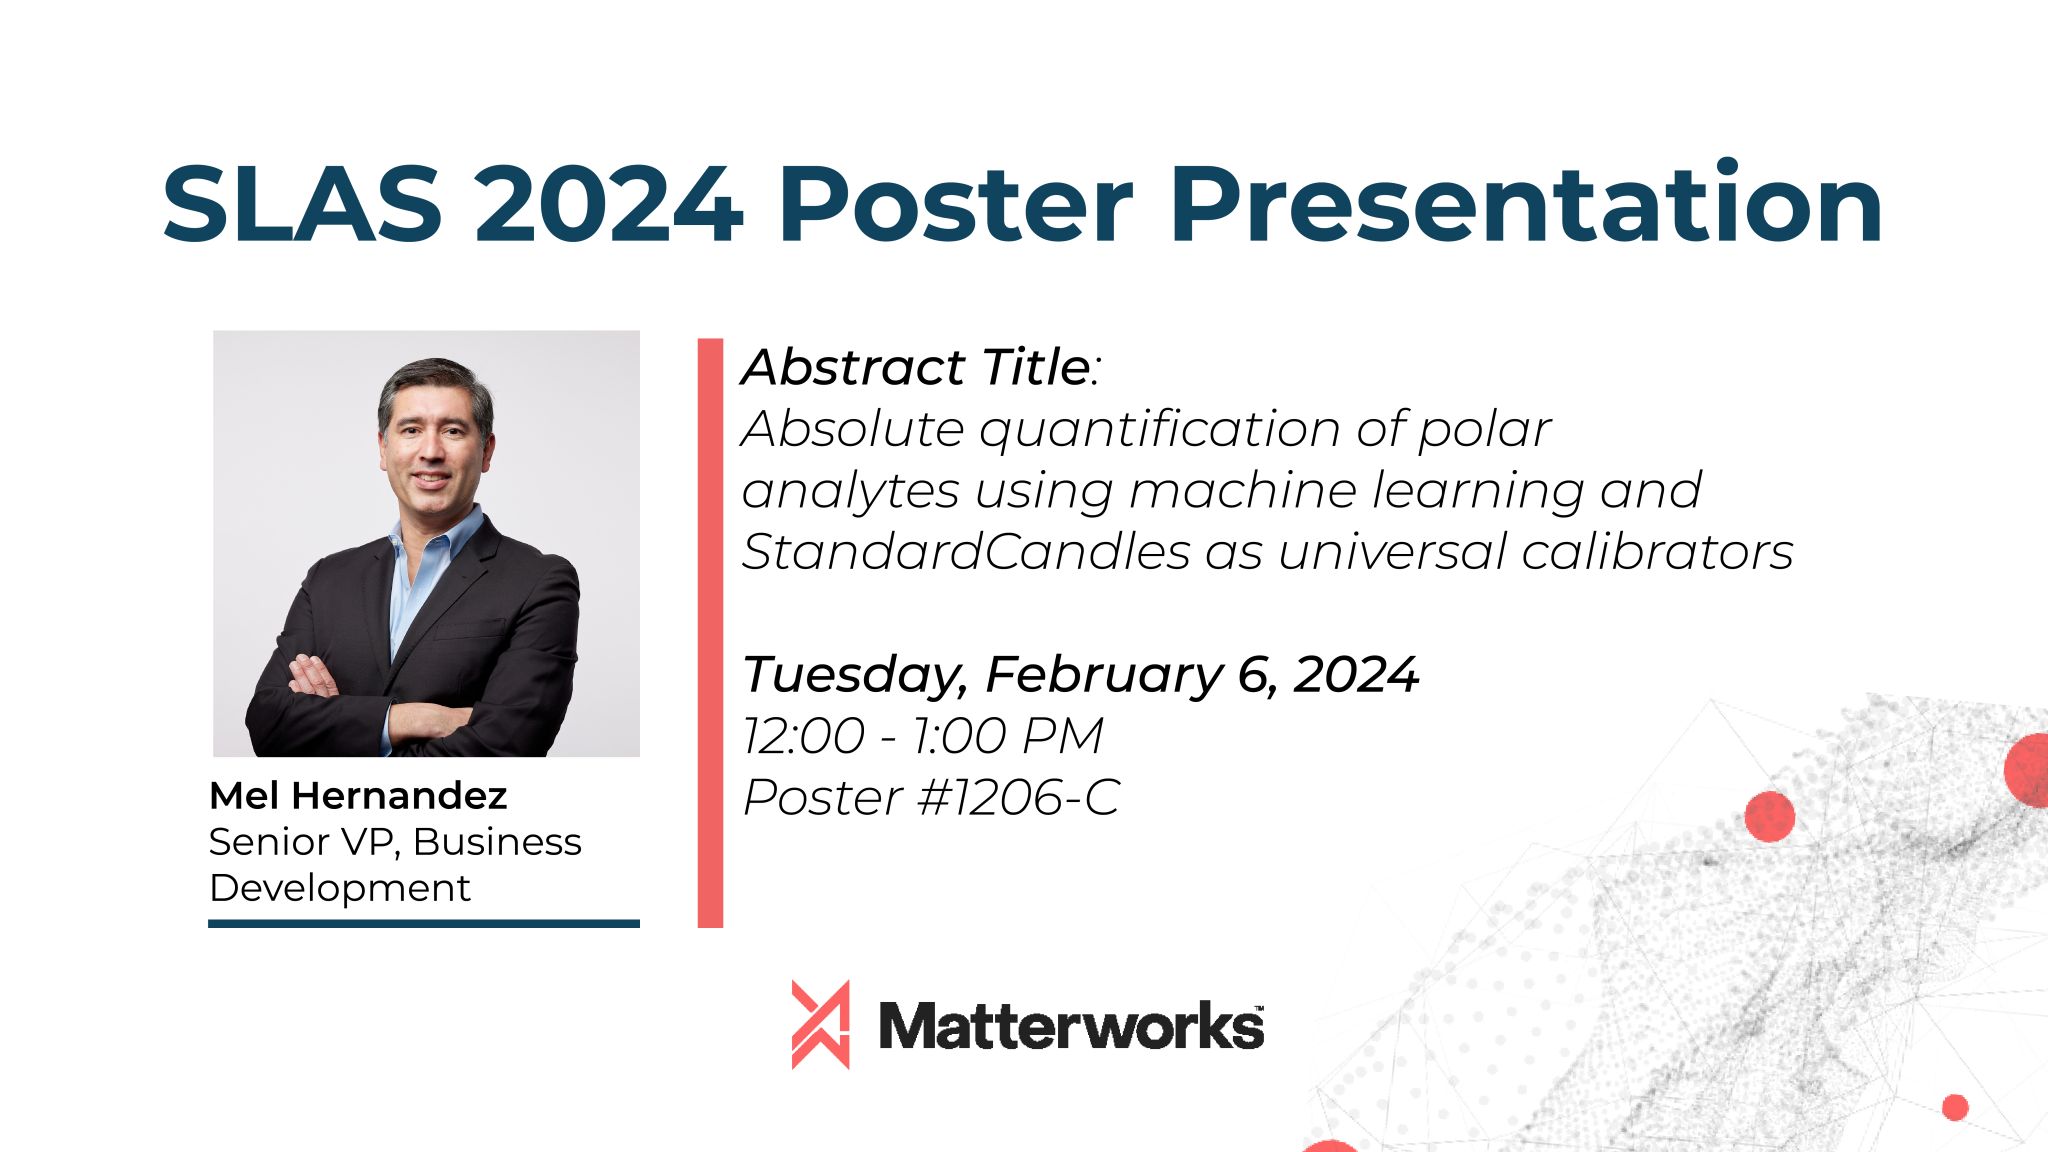 Matterworks is excited to announce the presentation of a poster at #SLAS2024 International Confer...